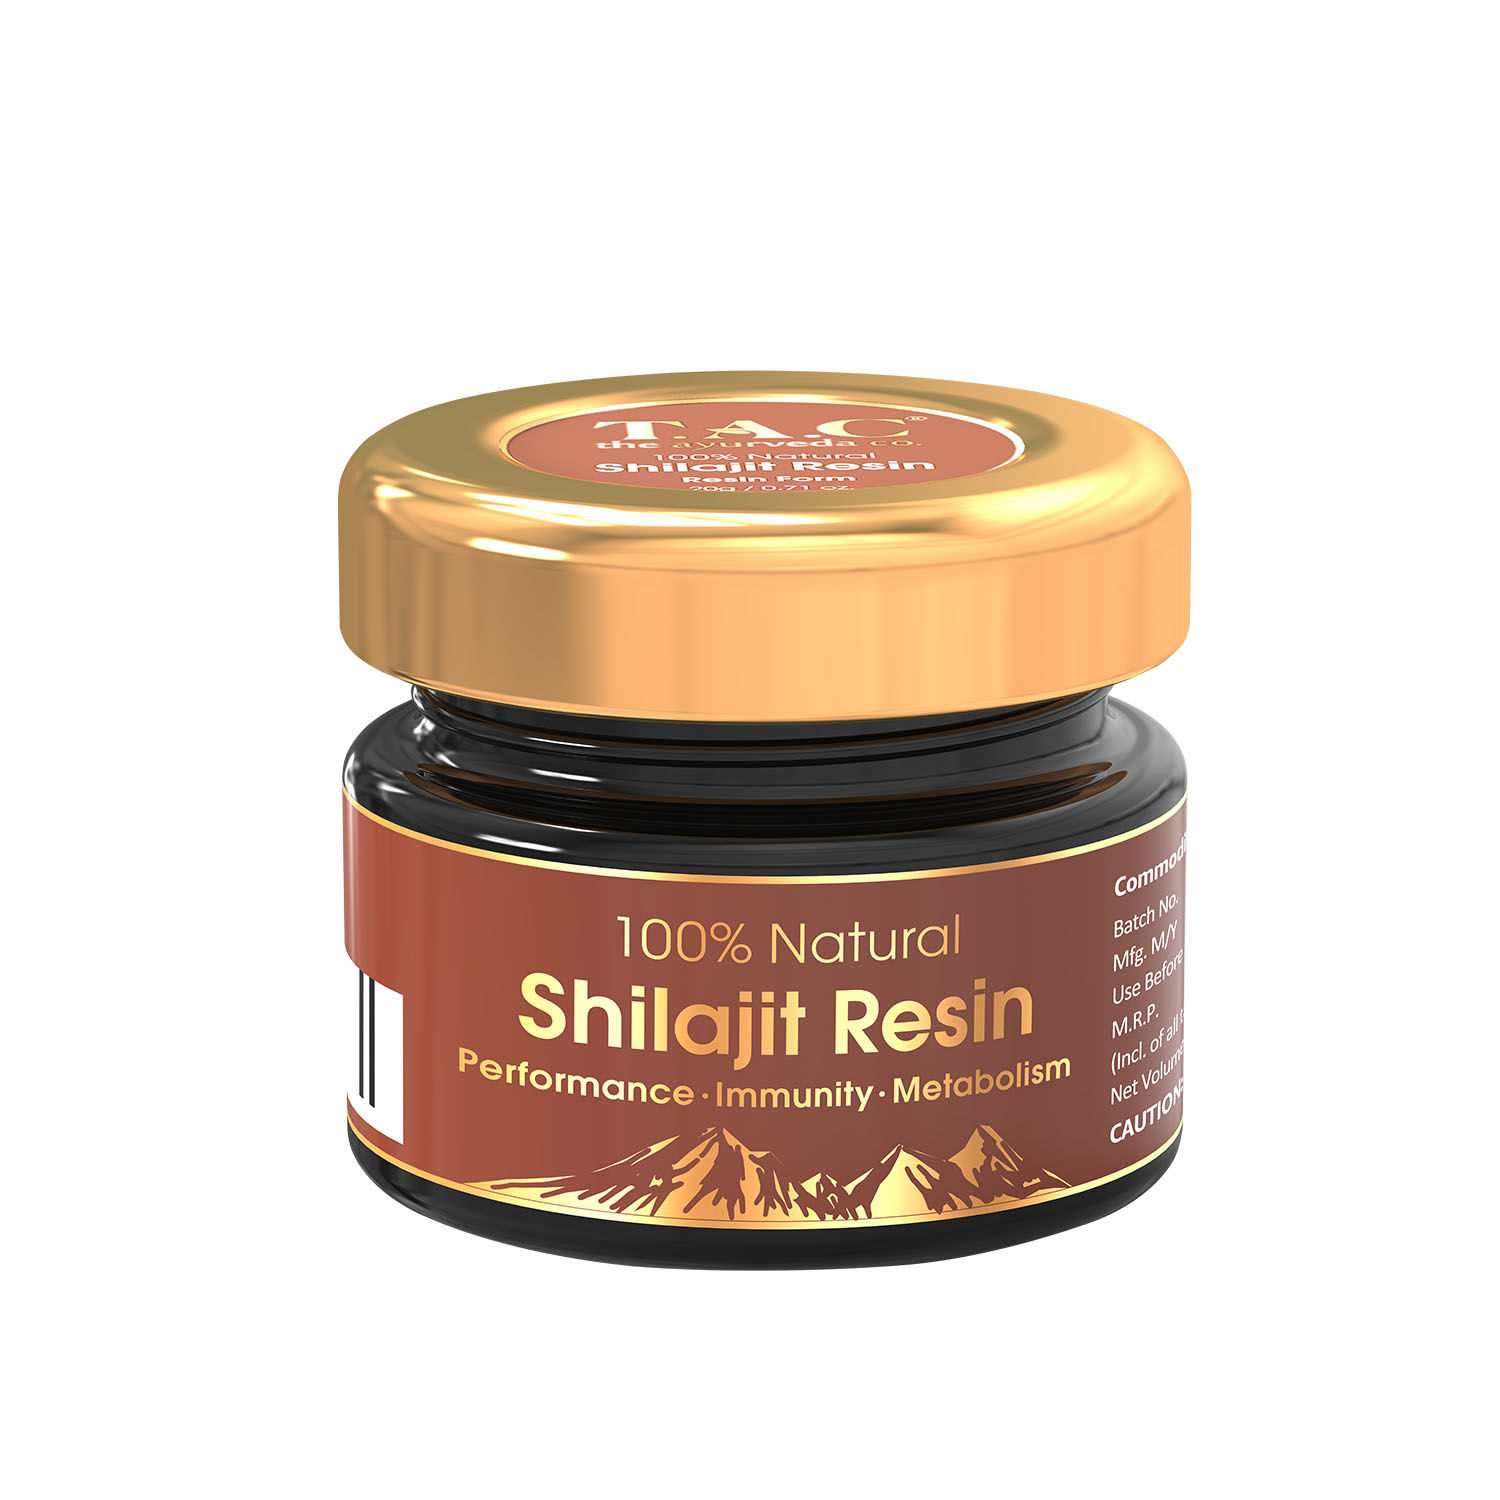 Buy TAC - The Ayurveda Co. 100% Natural Shilajit Resin for Immunity and Metabolism, 20gm - Purplle